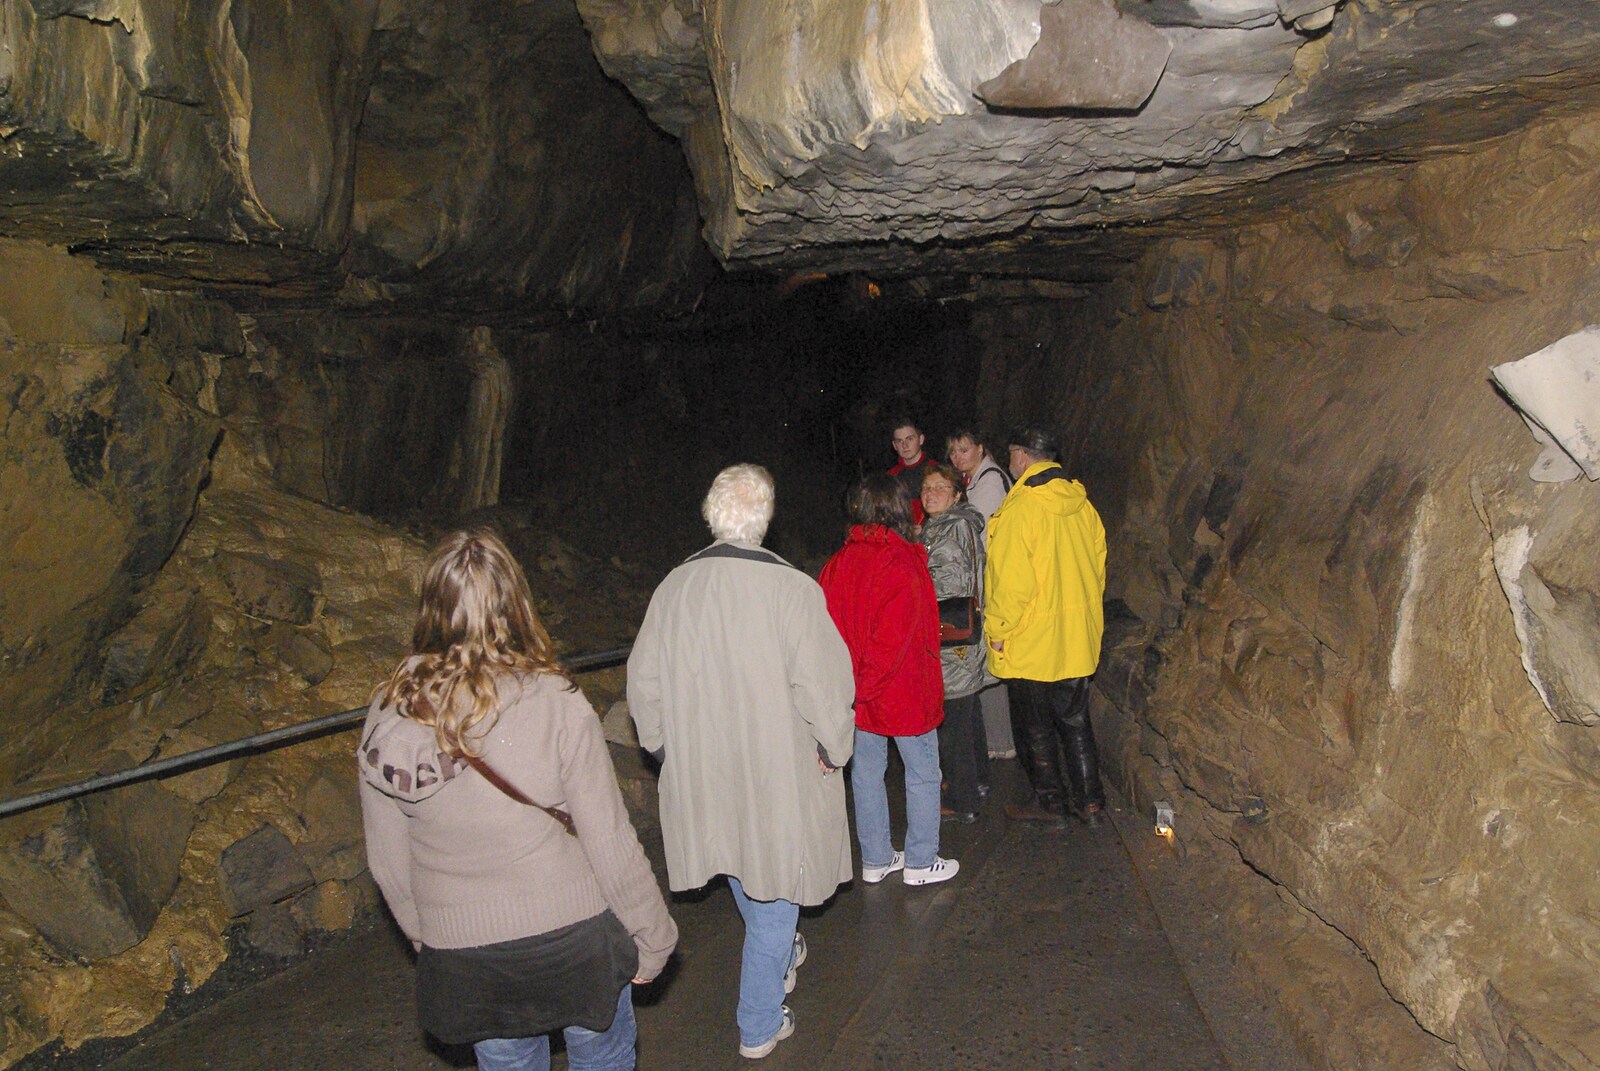 Kilkee to Galway, Connacht, Ireland - 23rd September 2007: The tour group heads through the caves